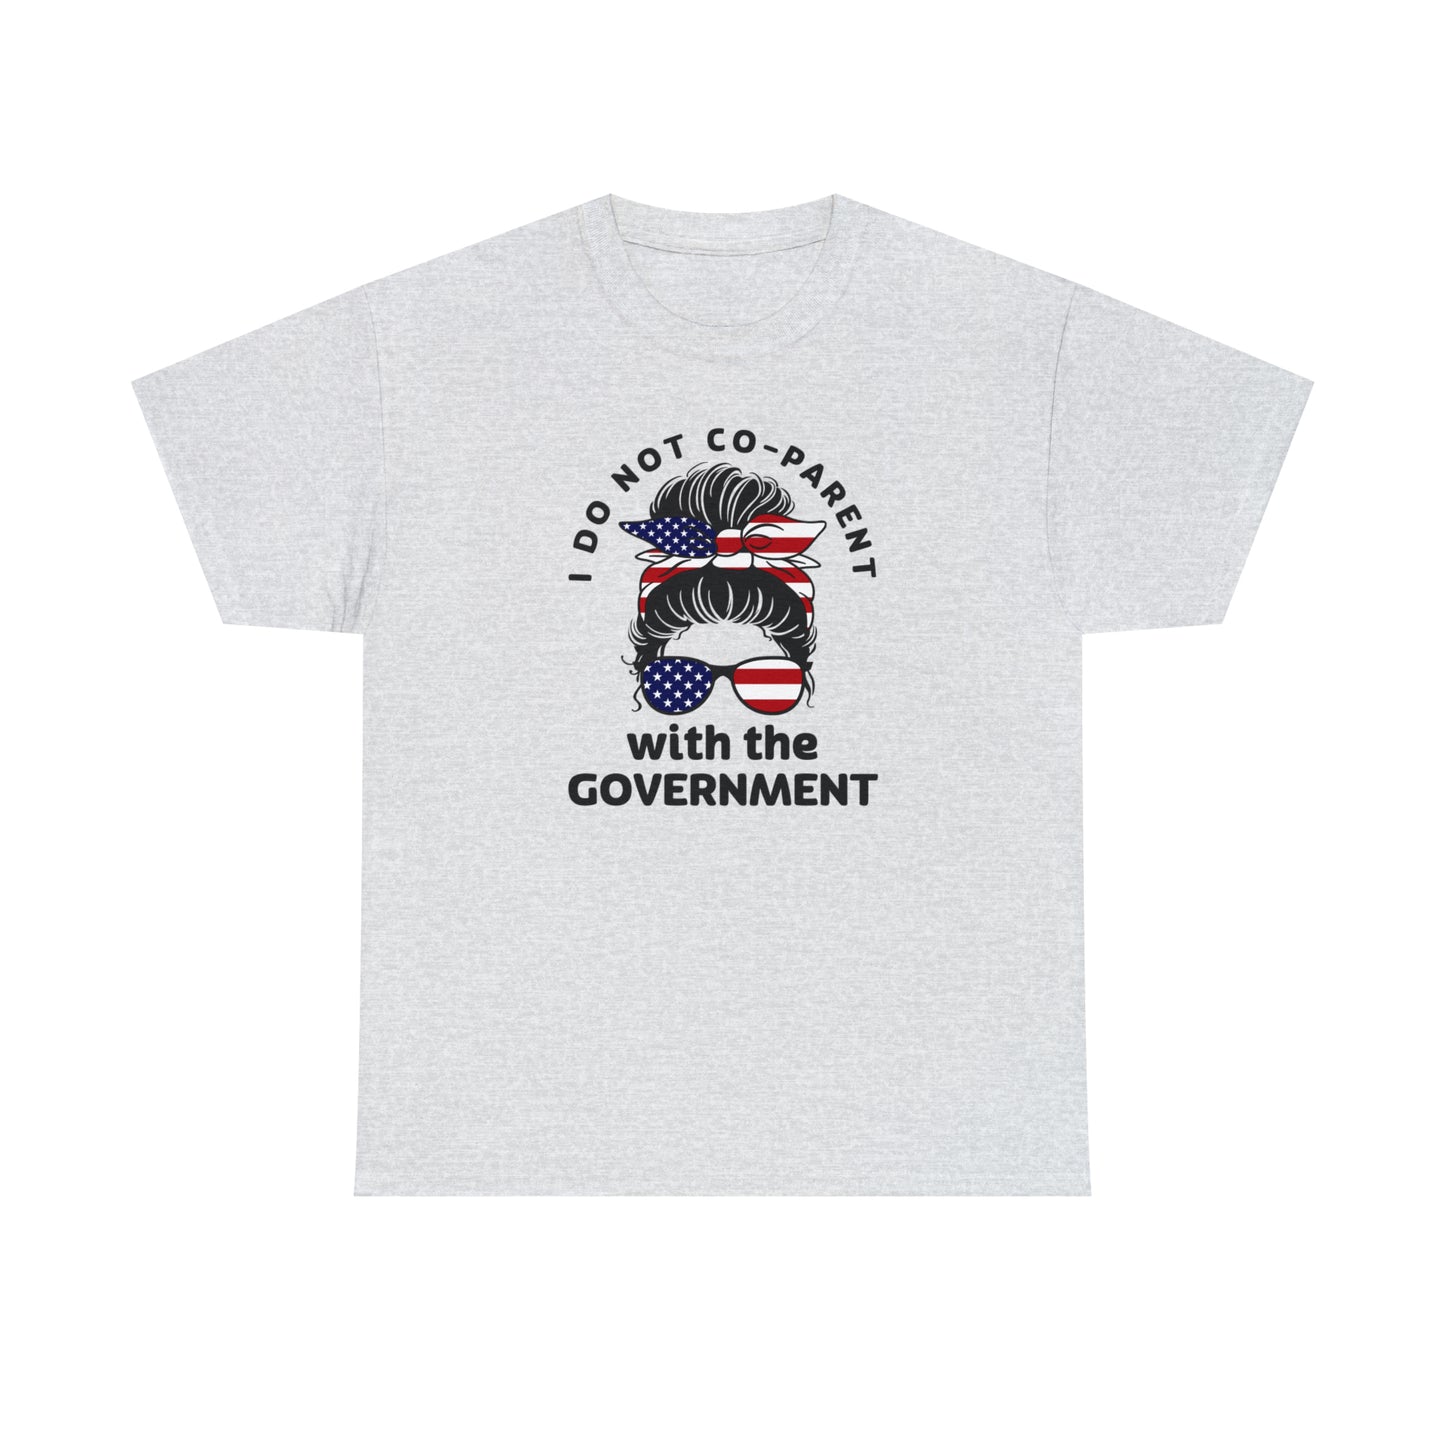 Patriotic Mom T-Shirt For I Don't Co-Parent TShirt For American Mom T Shirt With Messy Bun Shirt For Conservative Mom T-Shirt For Angry Mothers T-Shirt For Fourth Of July TShirt